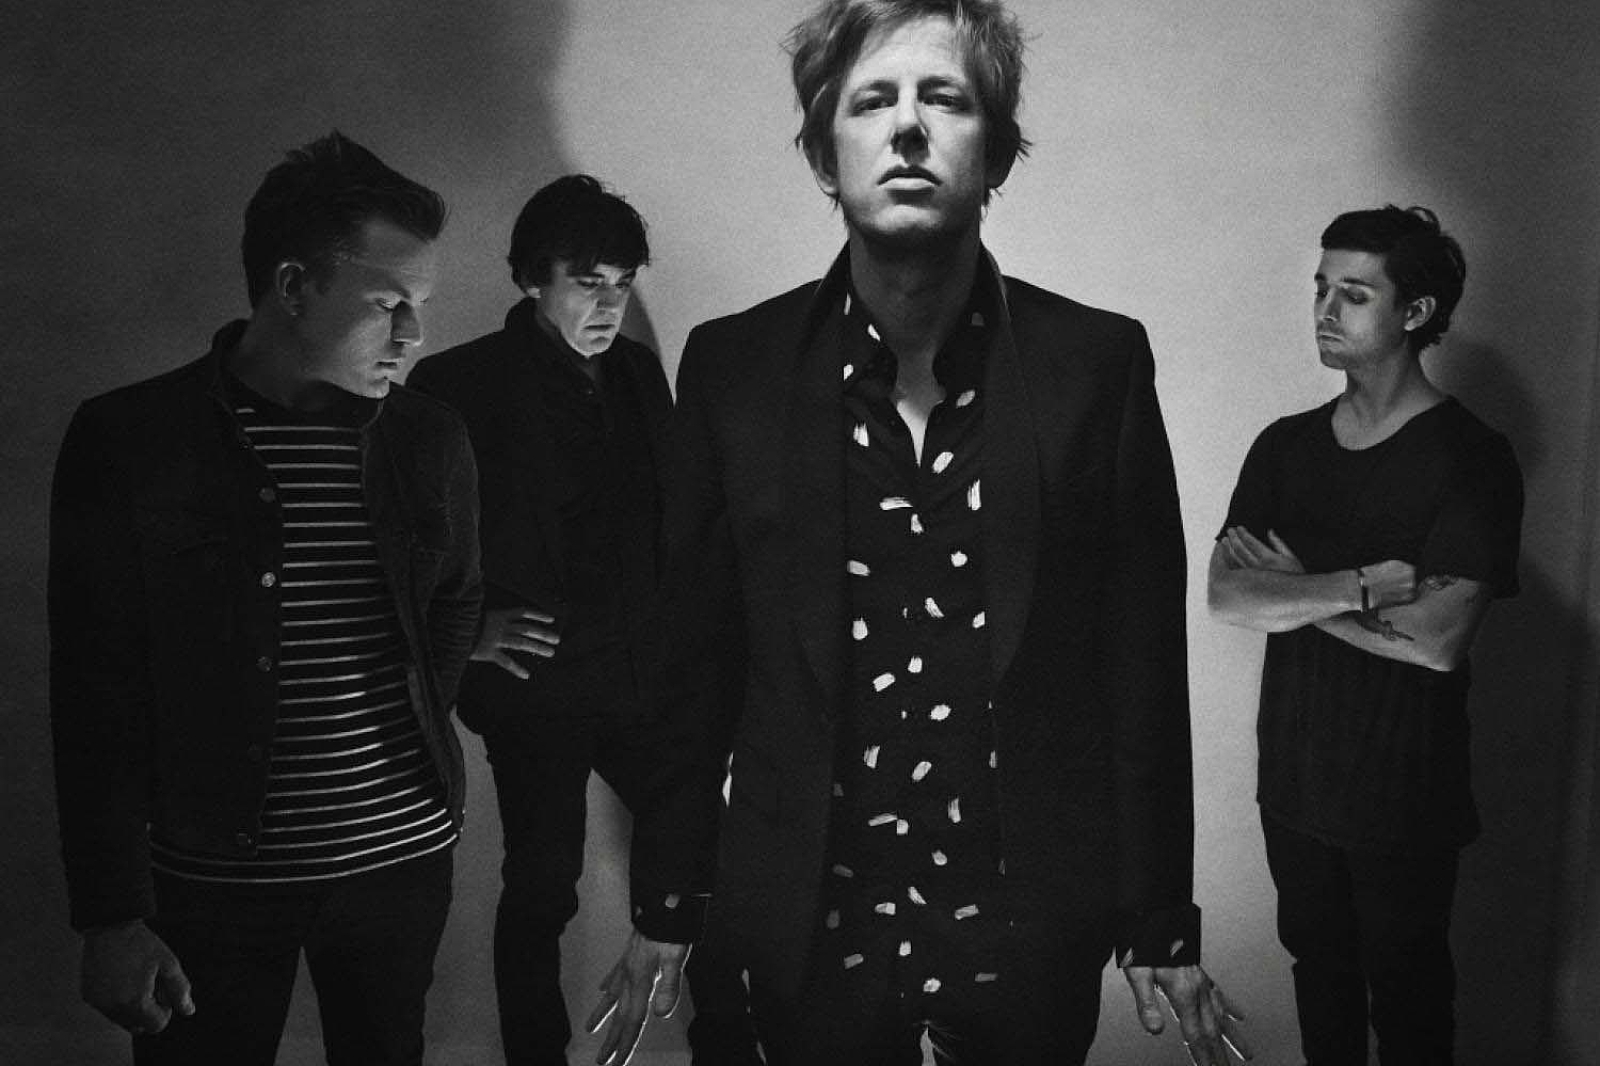 Spoon announce new best of compilation, with new track 'No Bullets Spent'